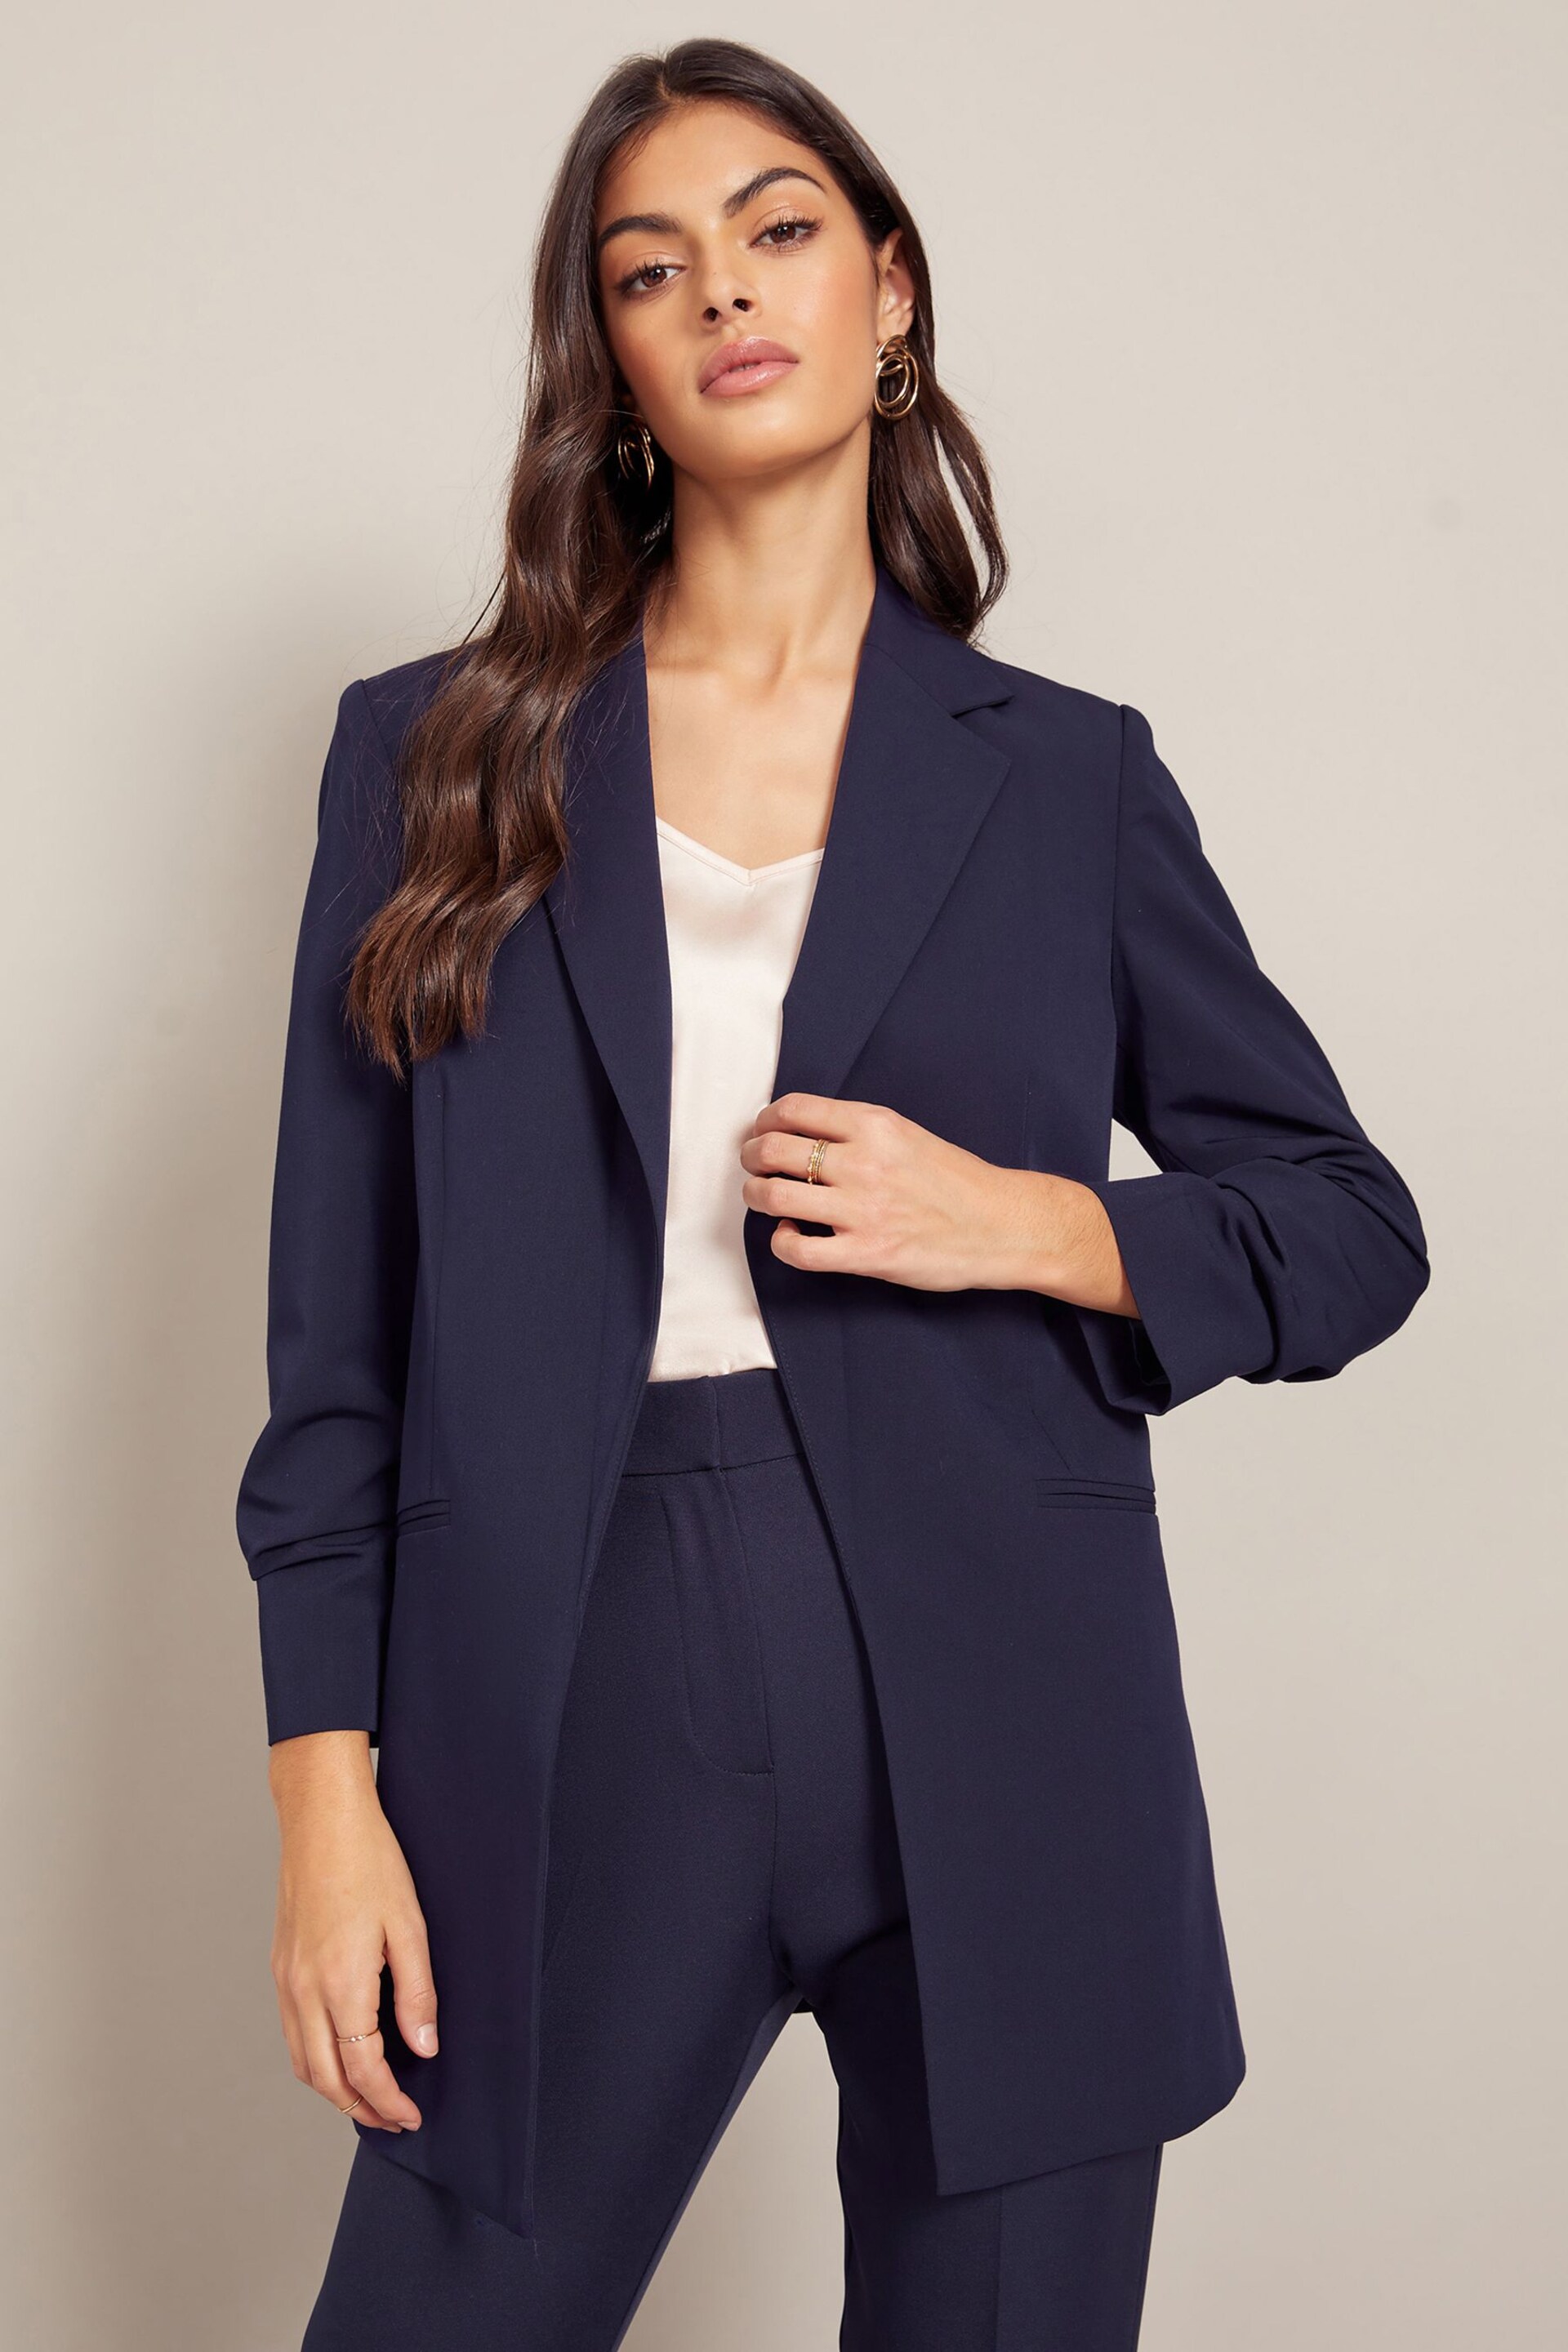 Friends Like These Navy Blue Petite Edge to Edge Tailored Blazer - Image 1 of 4